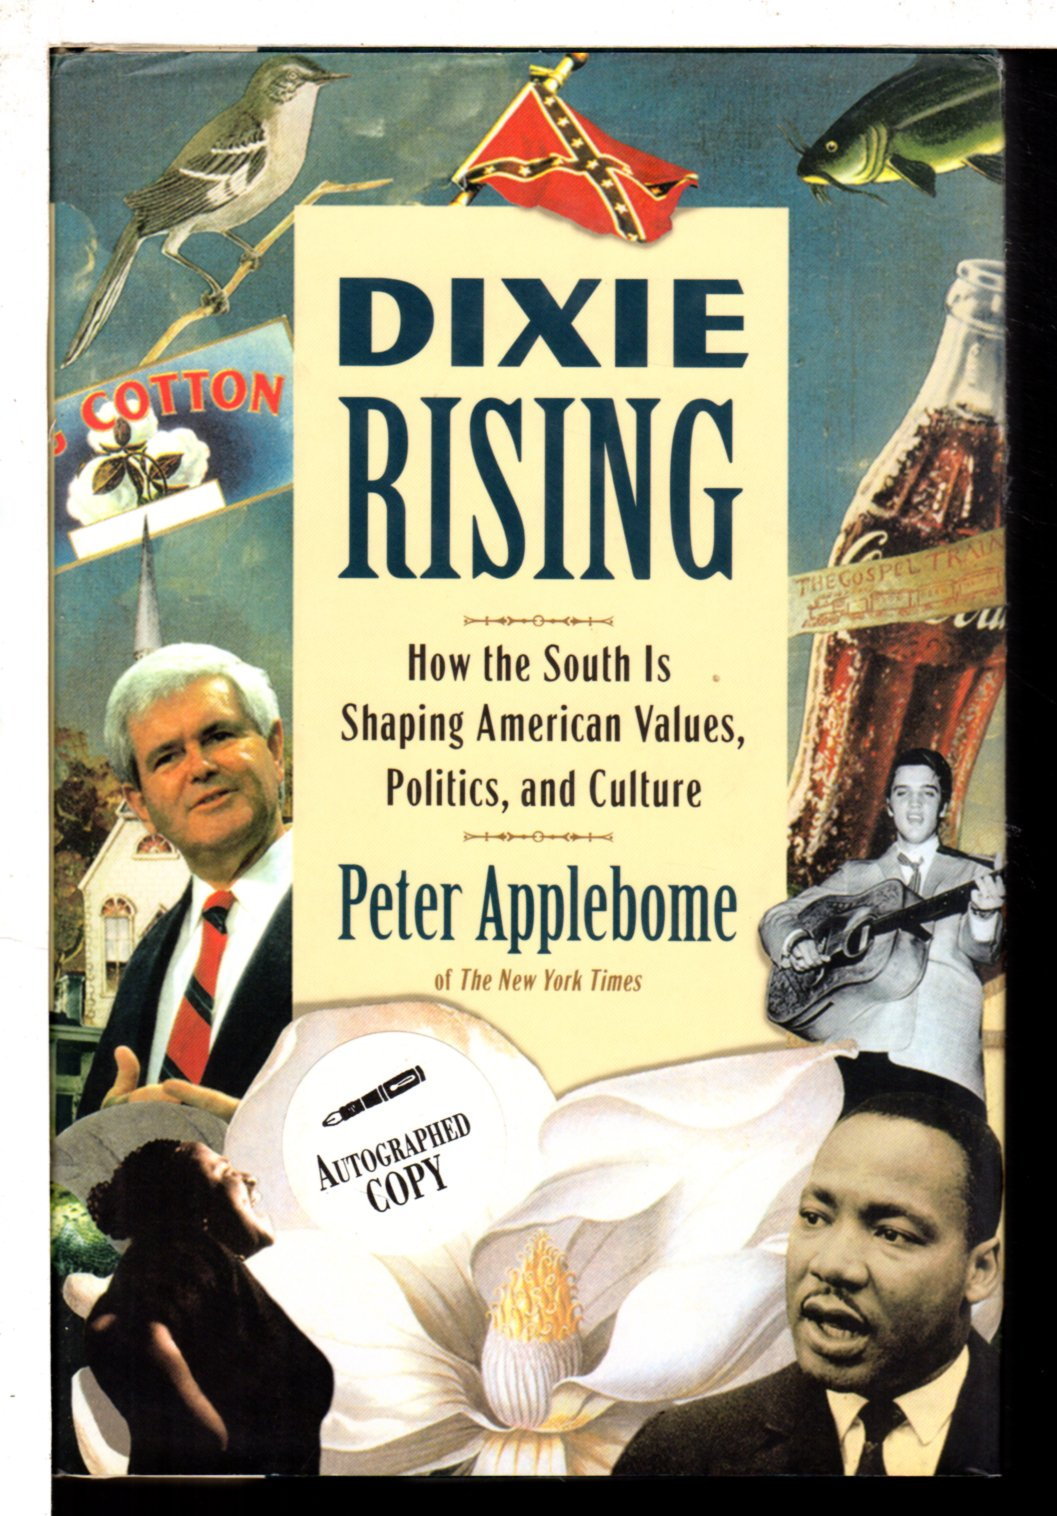 DIXIE RISING: How the South Is Shaping American Values, Politics, and Culture. - Applebome, Peter.